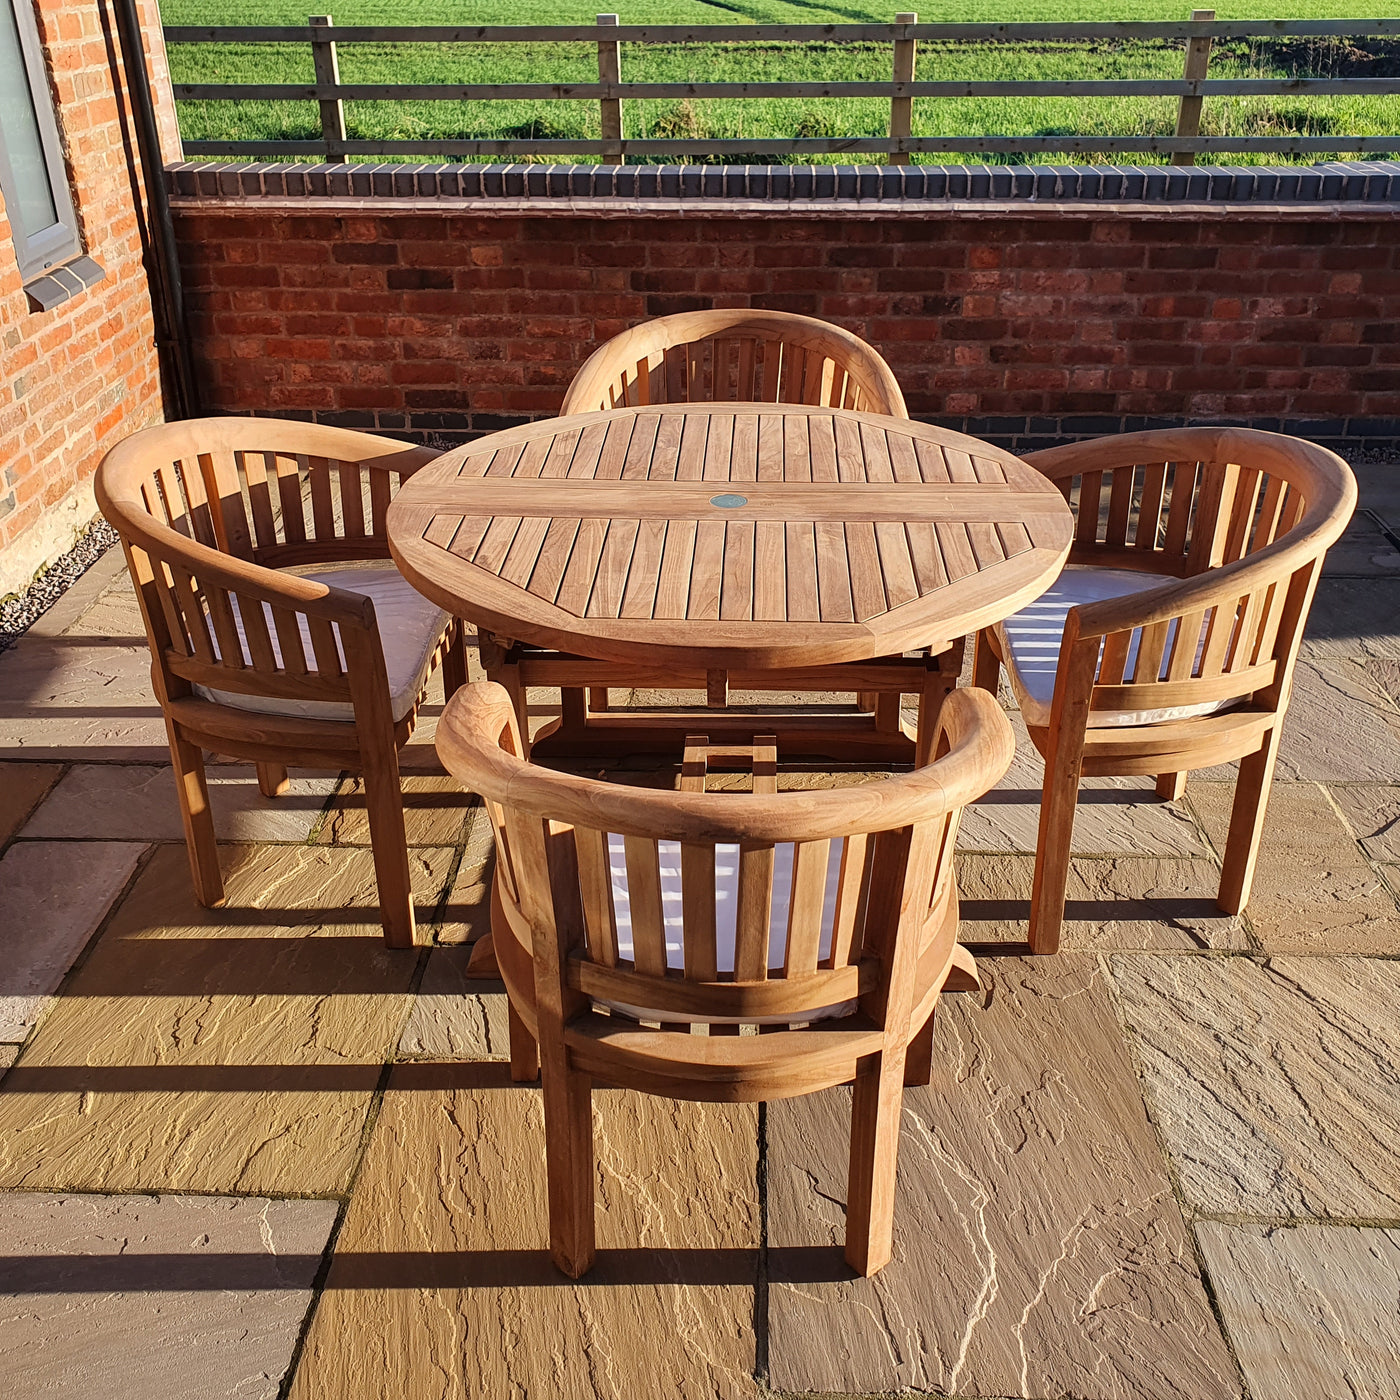 A Round To Oval 120-170cm Extending Table & 4 San Francisco Chairs Complete set Cushions Free Delivery and four matching chairs on a brick patio, with green grass and a brick wall in the background.